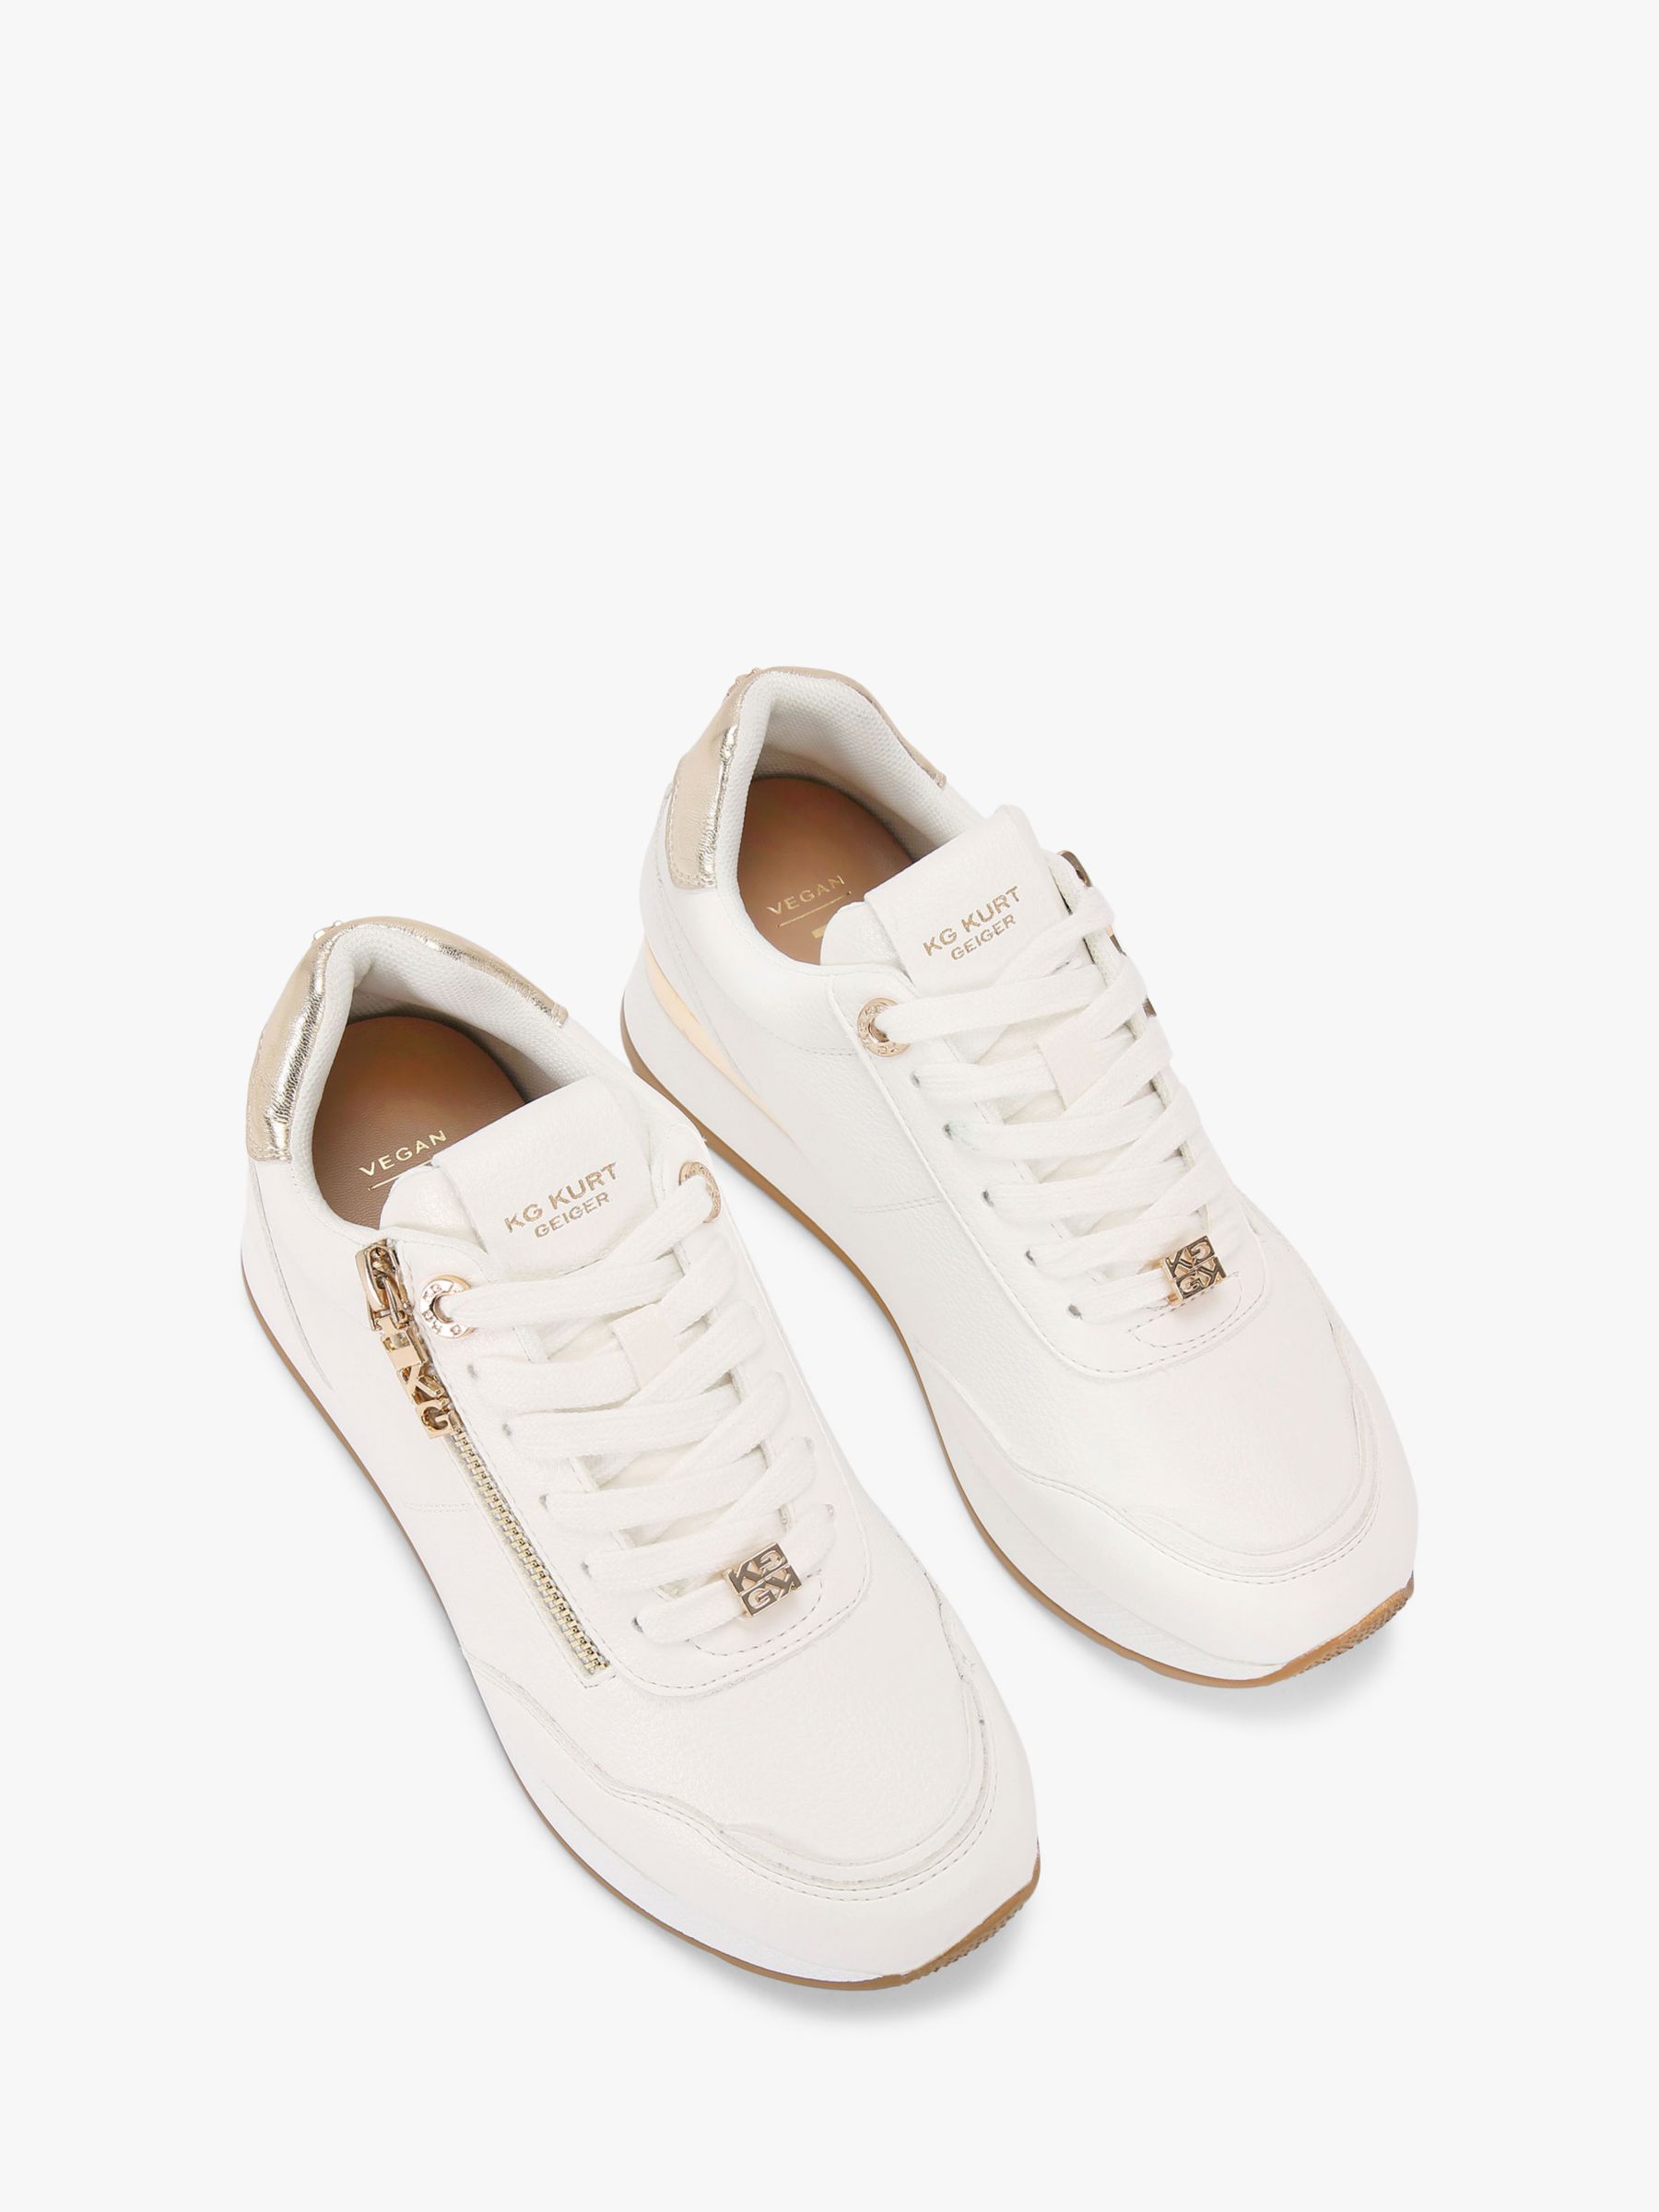 KG Kurt Geiger Lina Chunky Sole Trainers, White at John Lewis & Partners